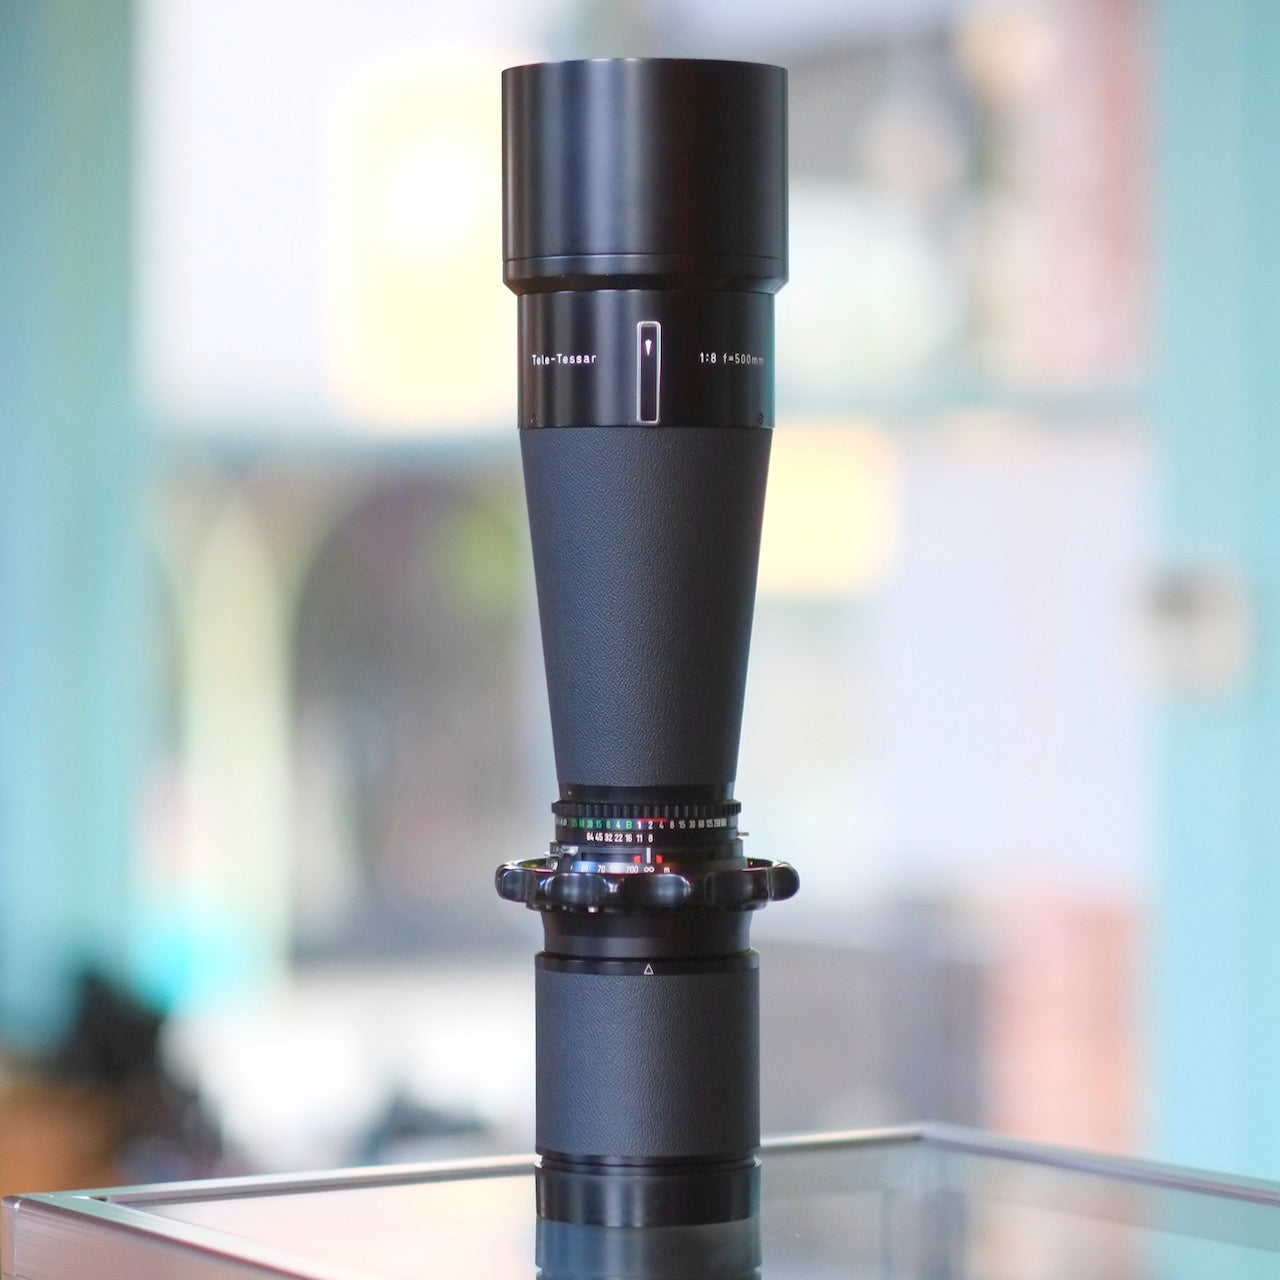 Carl Zeiss Tele-Tessar 500mm f8 for Hasselblad V